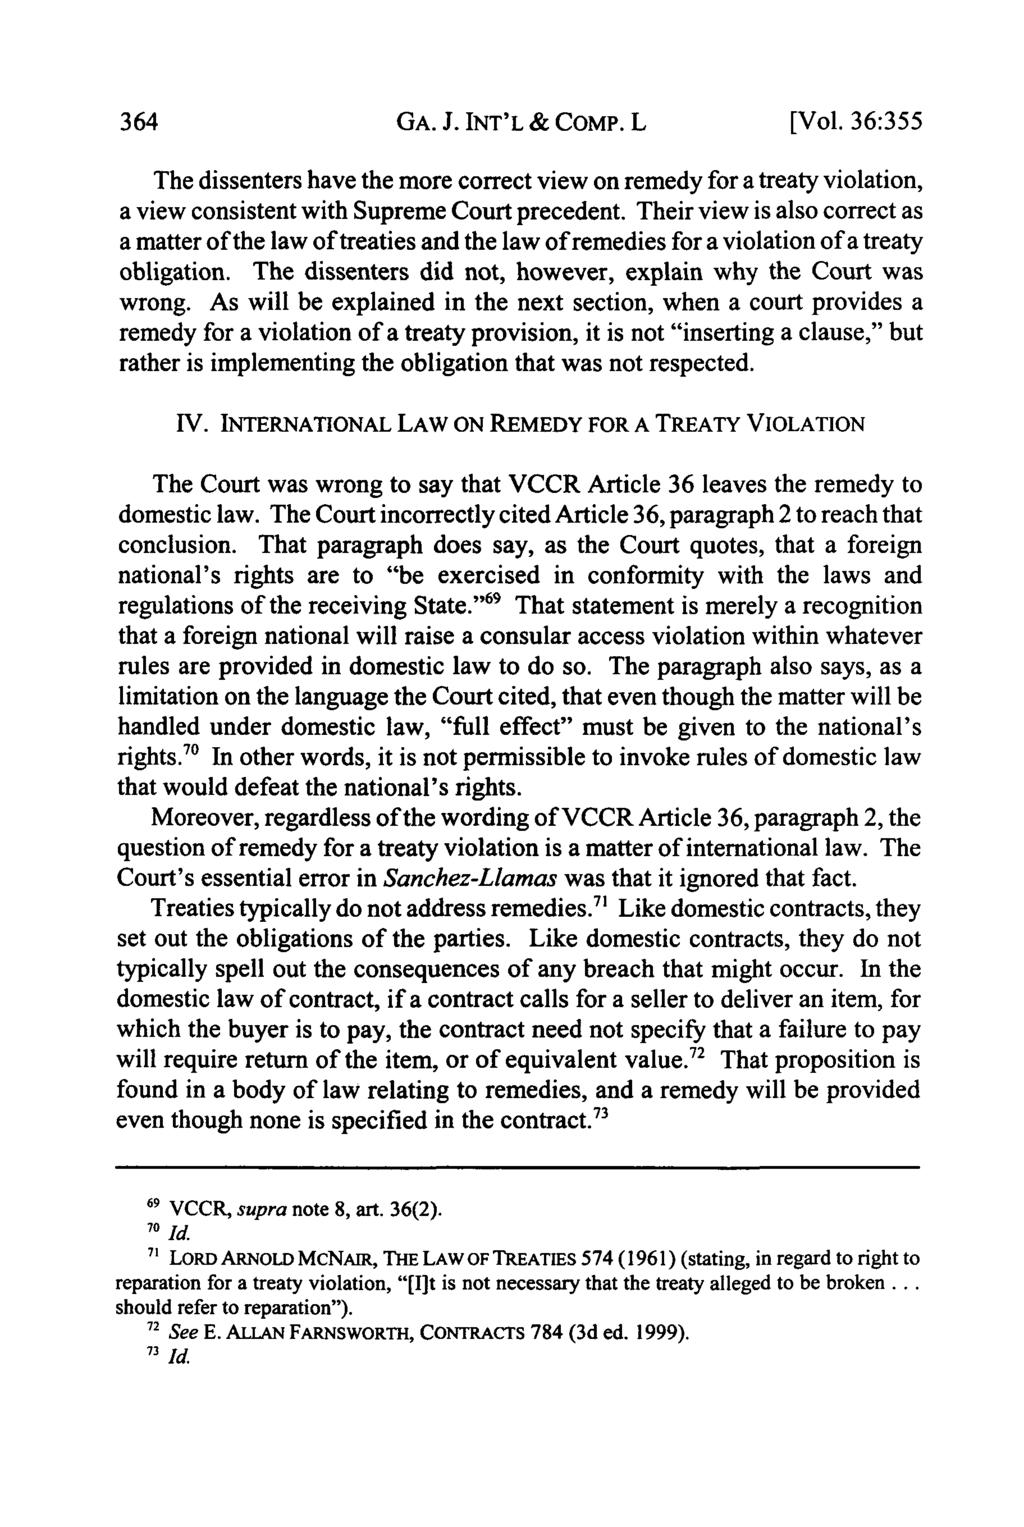 GA. J. INT'L & CoMP. L [Vol. 36:355 The dissenters have the more correct view on remedy for a treaty violation, a view consistent with Supreme Court precedent.